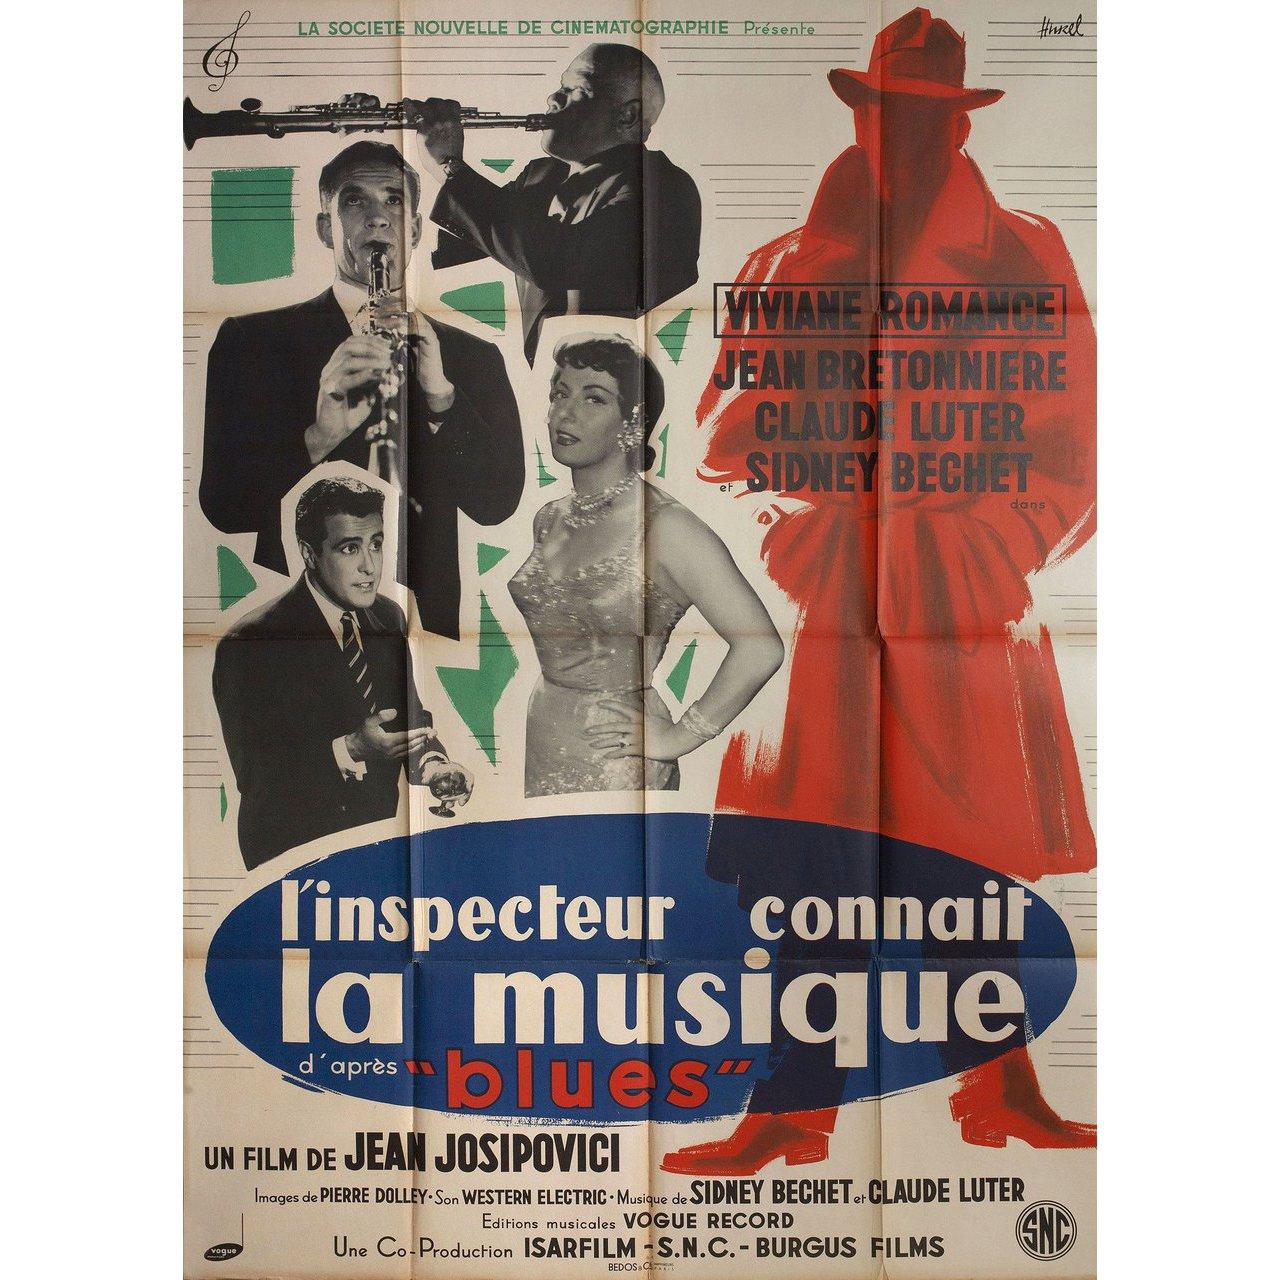 Original 1956 French grande poster for. Very good-fine condition, folded. Many original posters were issued folded or were subsequently folded. Please note: the size is stated in inches and the actual size can vary by an inch or more.
 